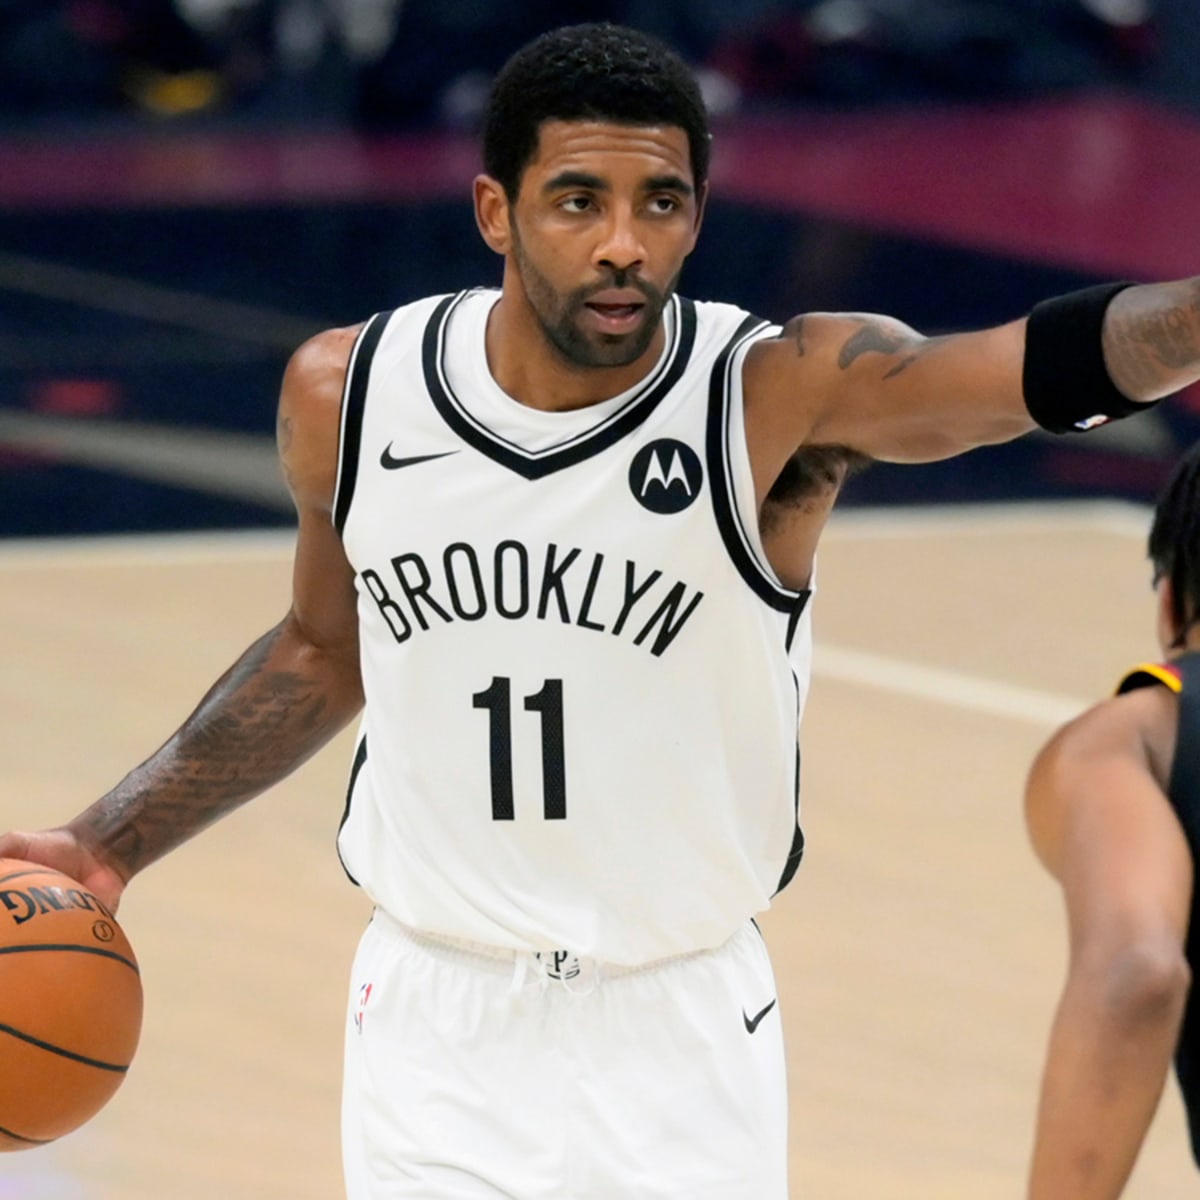 Kyrie Irving represents Nets' high and lows - Sports Illustrated